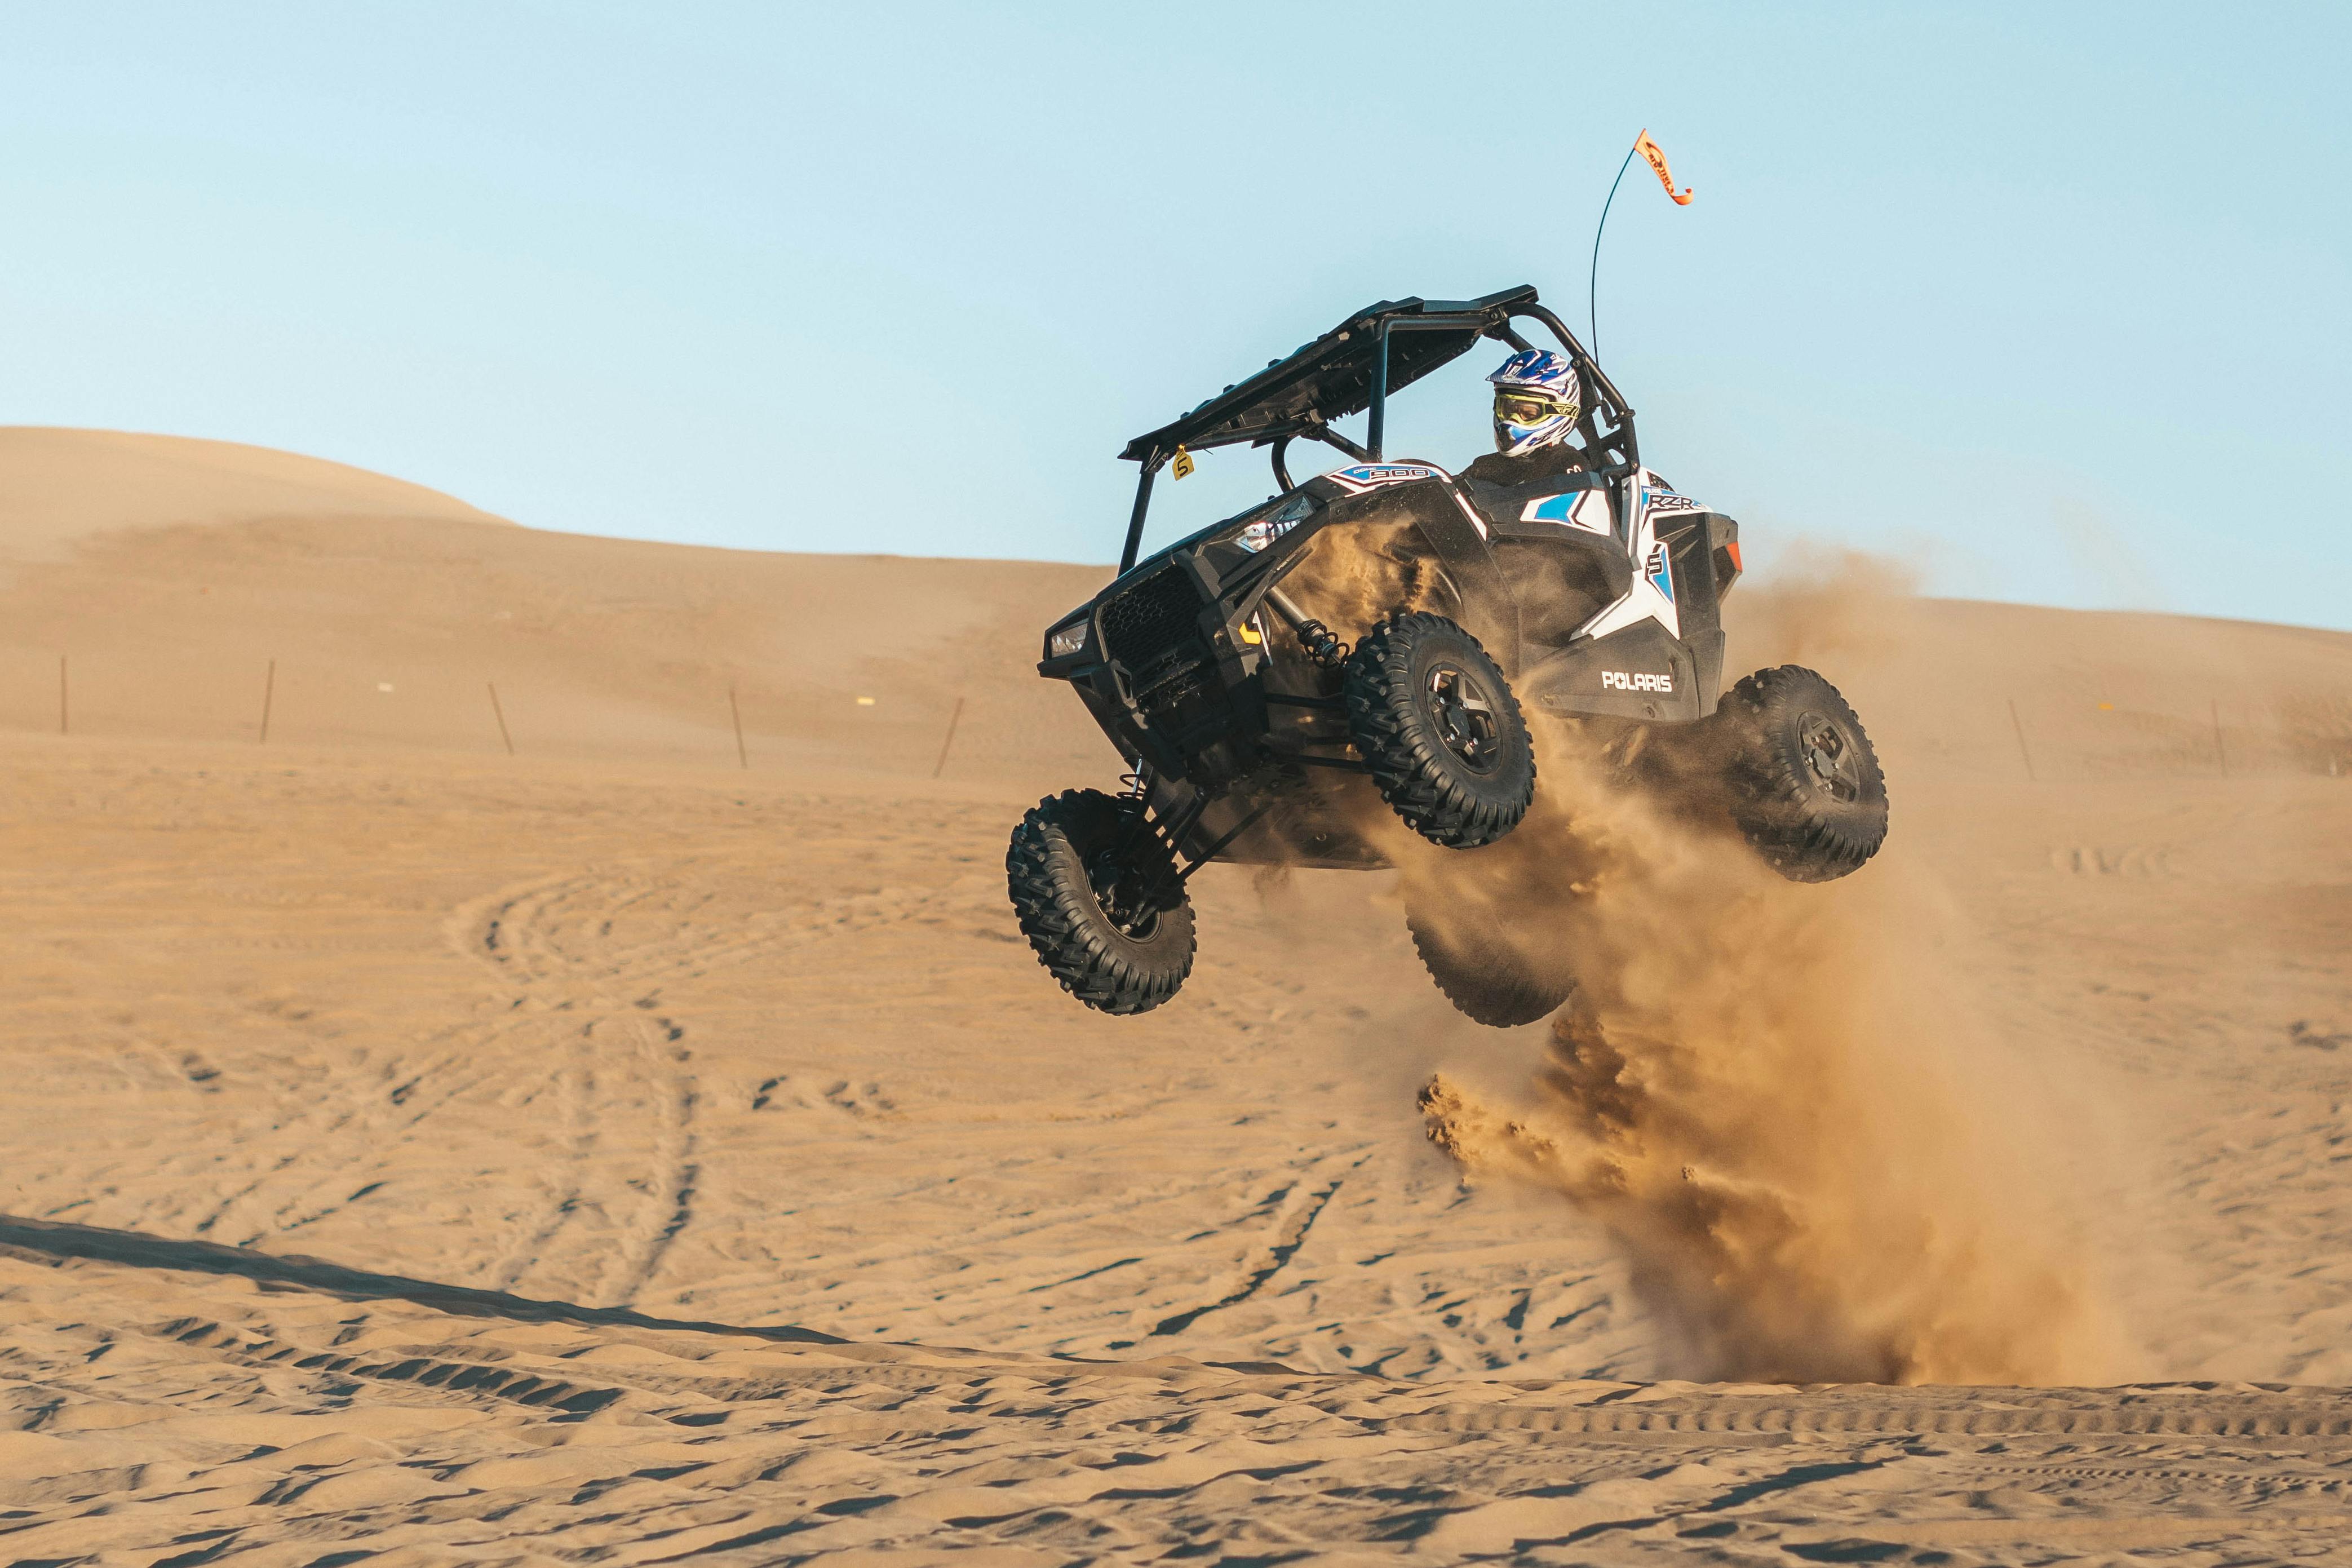 Dune buggy in mid-jump.